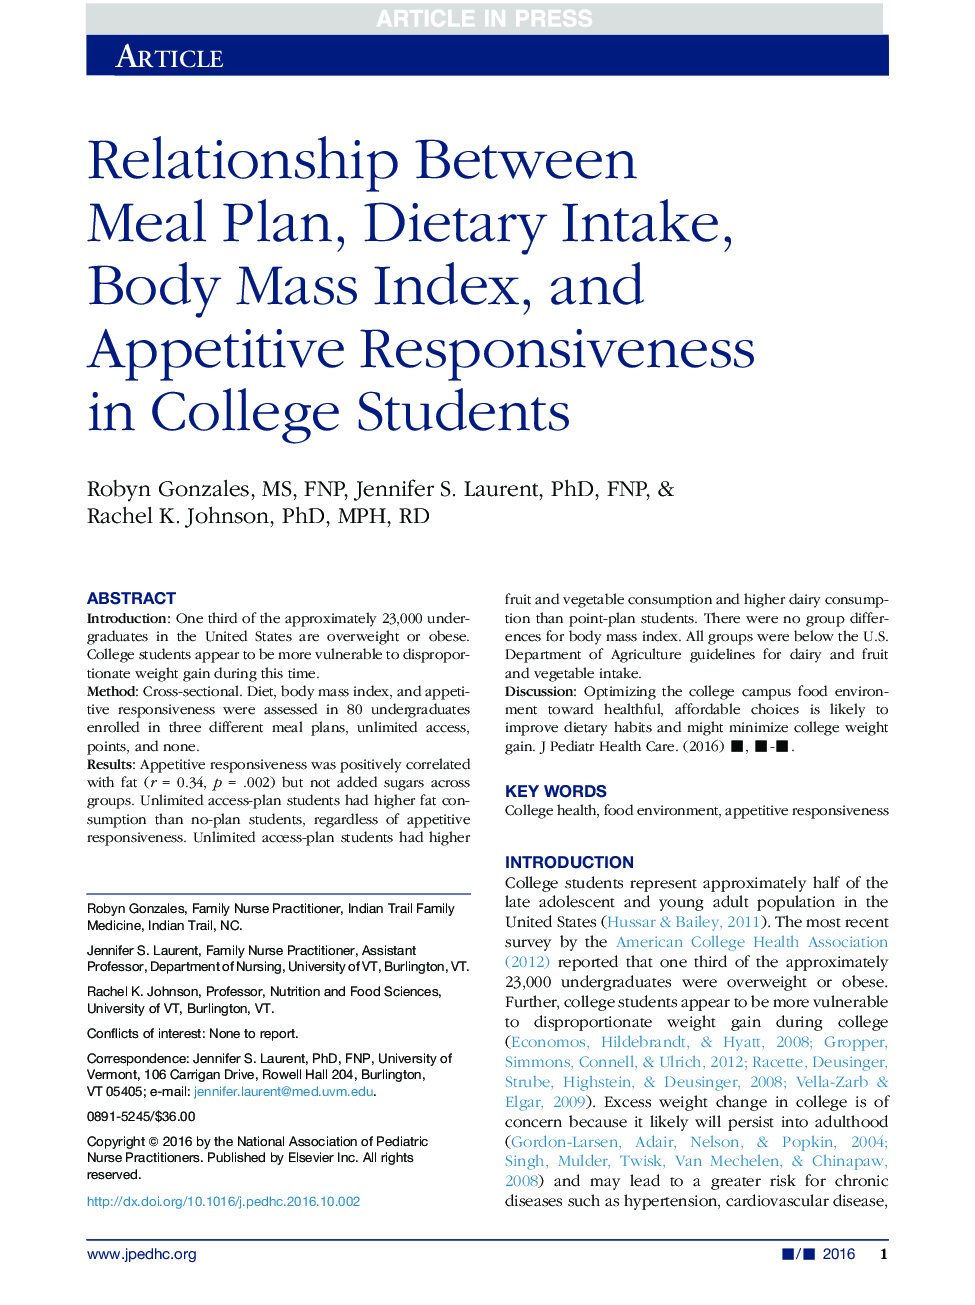 Relationship Between Meal Plan, Dietary Intake, Body Mass Index, and Appetitive Responsiveness in College Students